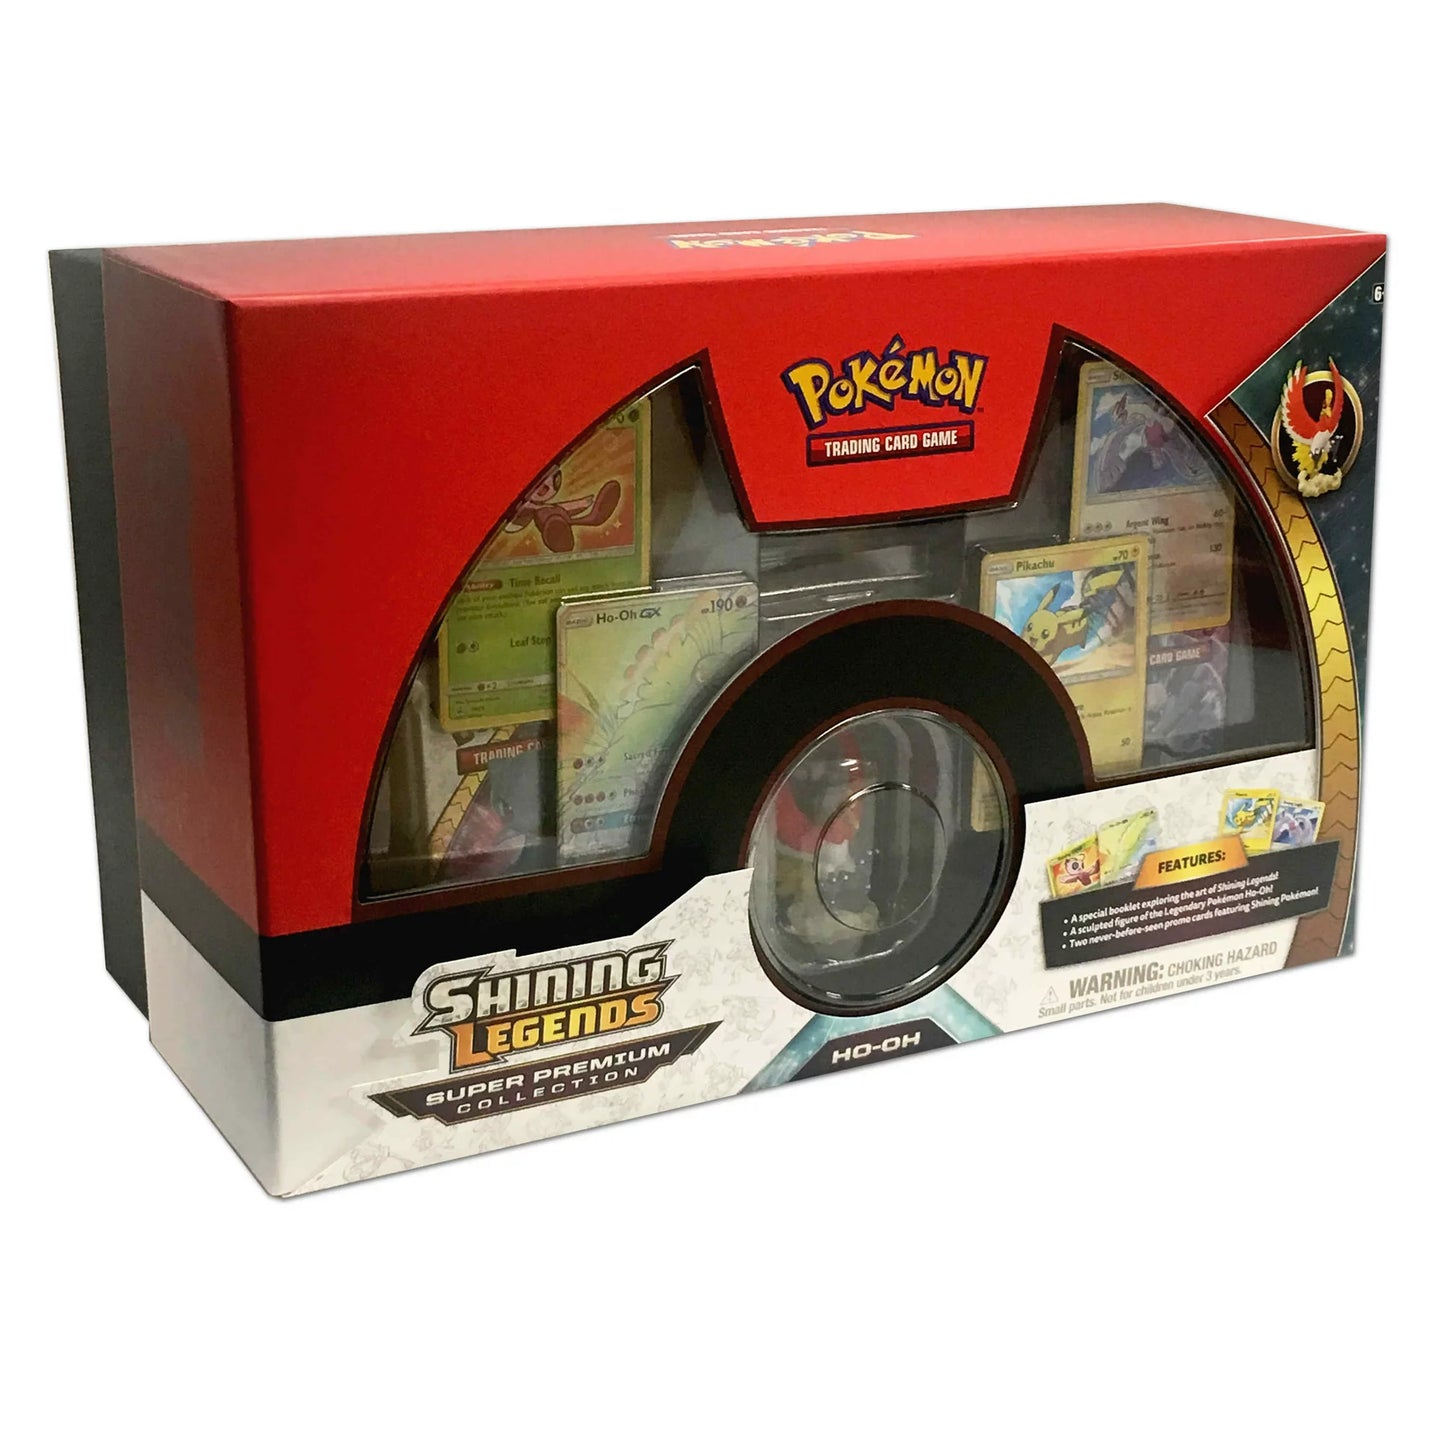 Pokemon Trading Card Game: Shining Legends Super Premium Collection (Small Tears in Shrinkwrap)